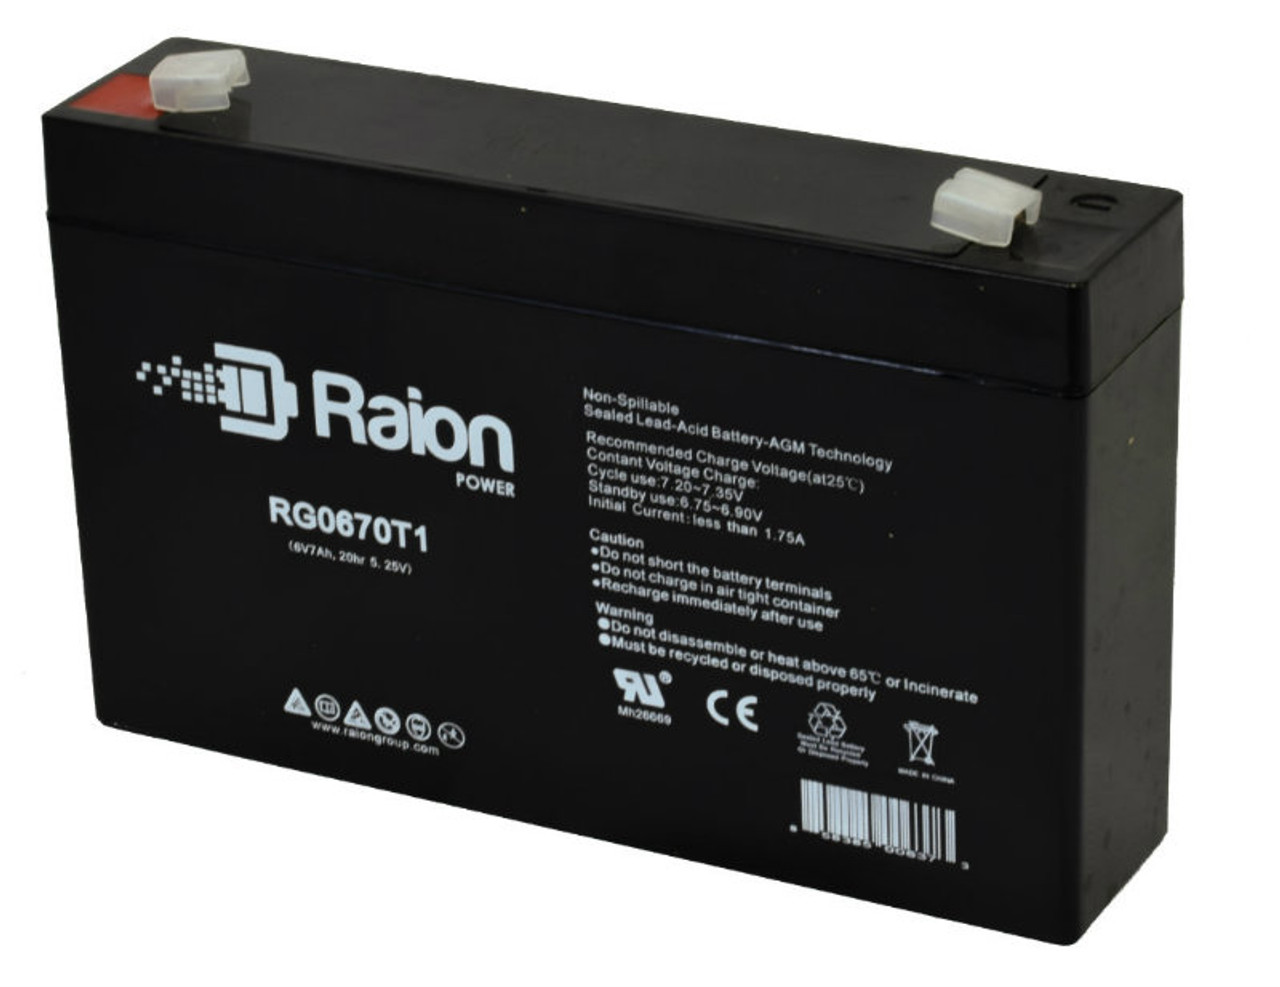 Raion Power RG0670T1 6V 7Ah Replacement Emergency Light Battery for Dual Lite 12-826